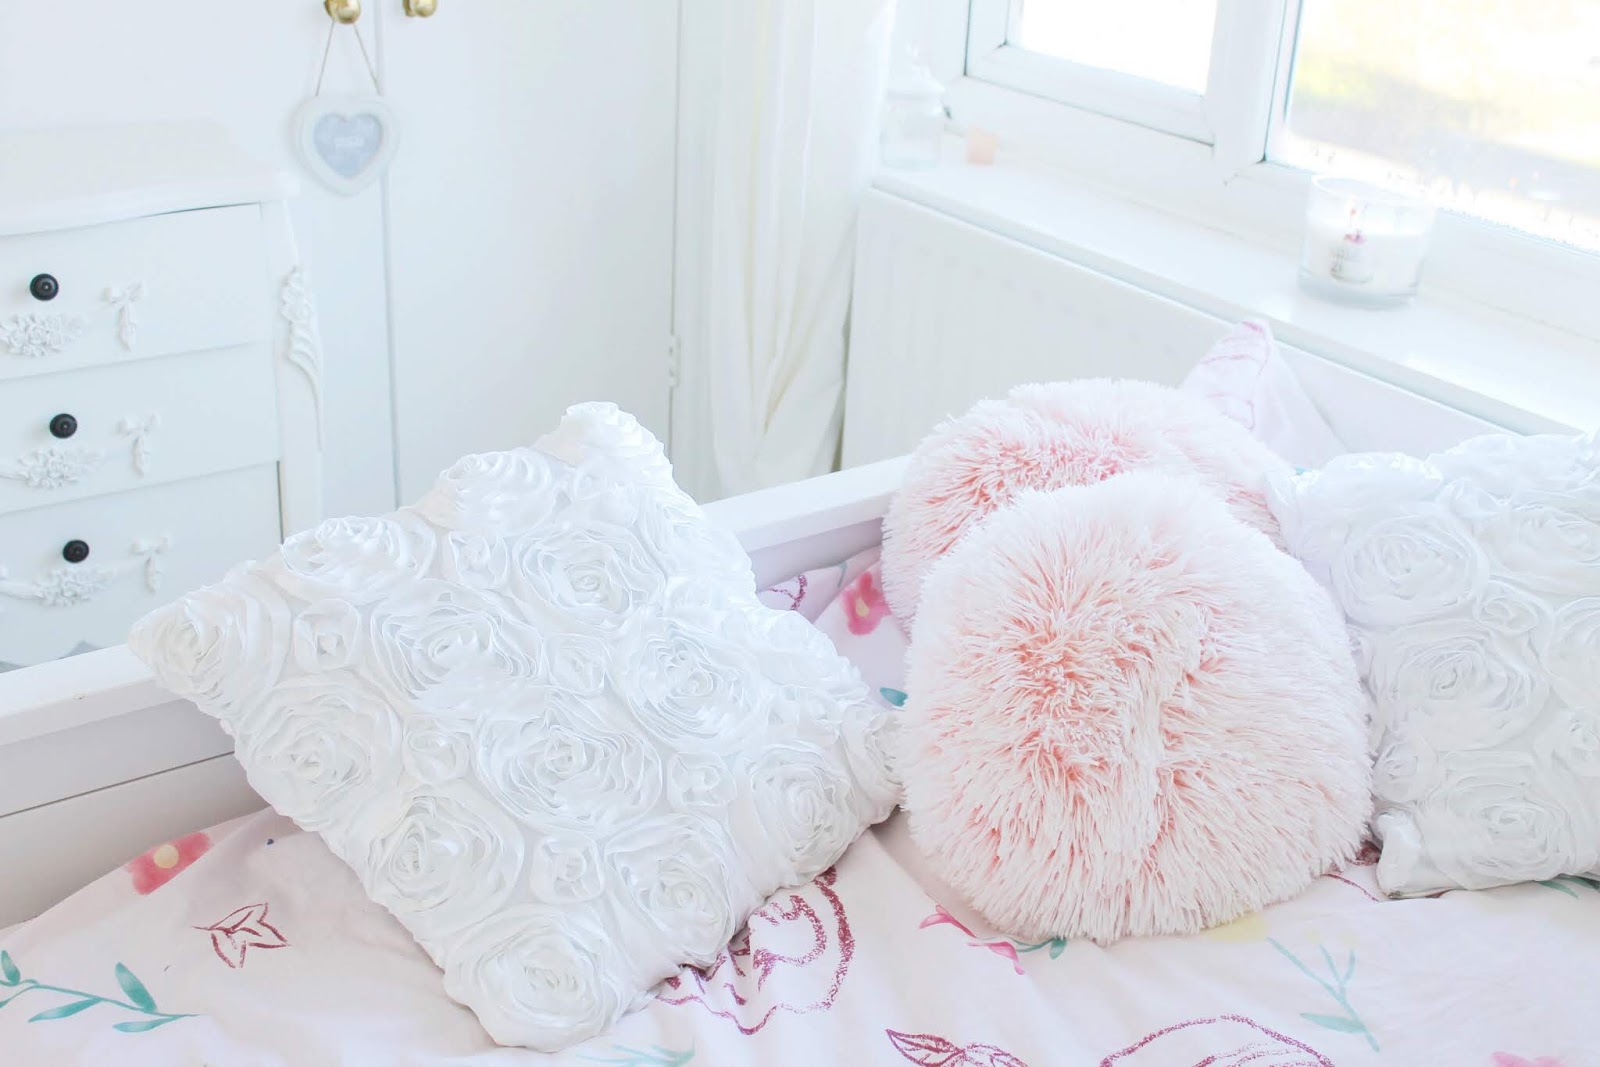 Modern princess room and home ideas for a girly apartment, girly bedroom or even dorm room